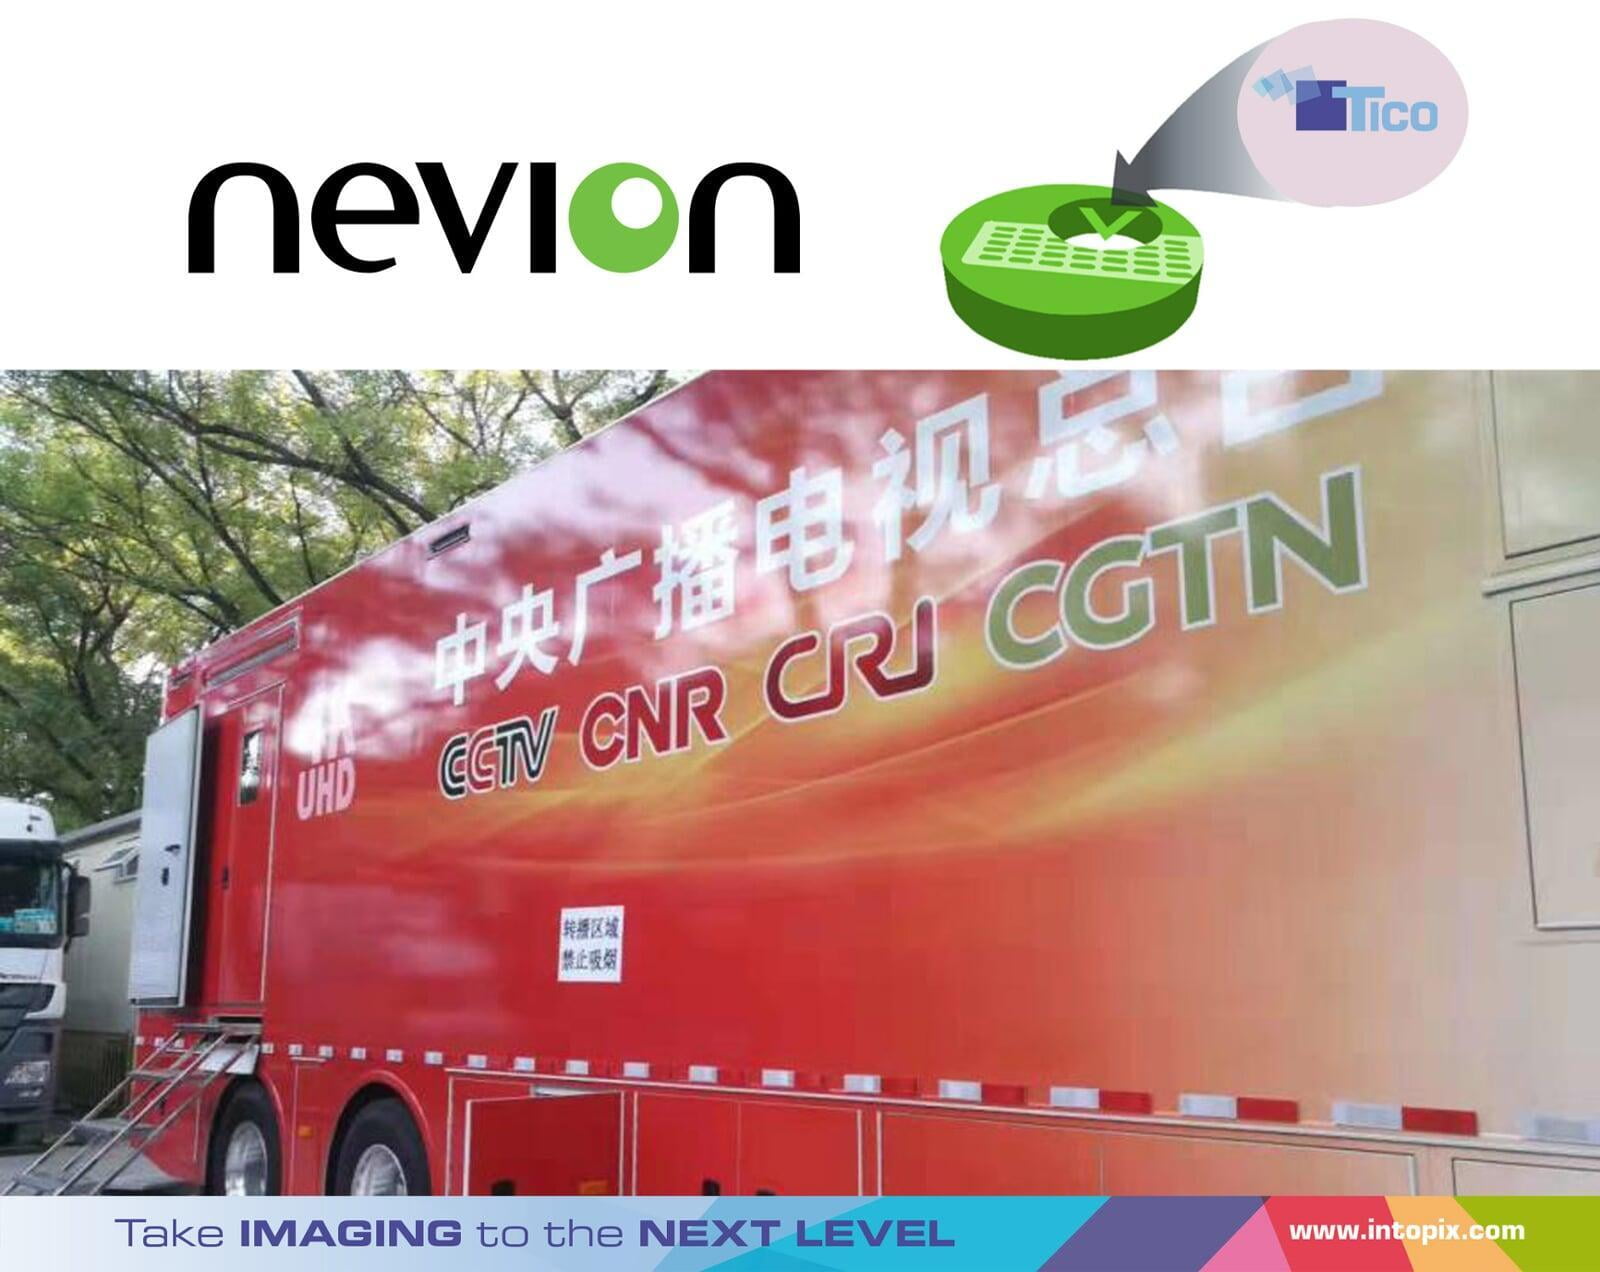 Nevion Virtuoso used in worlds first large-scale application of Tico video compression